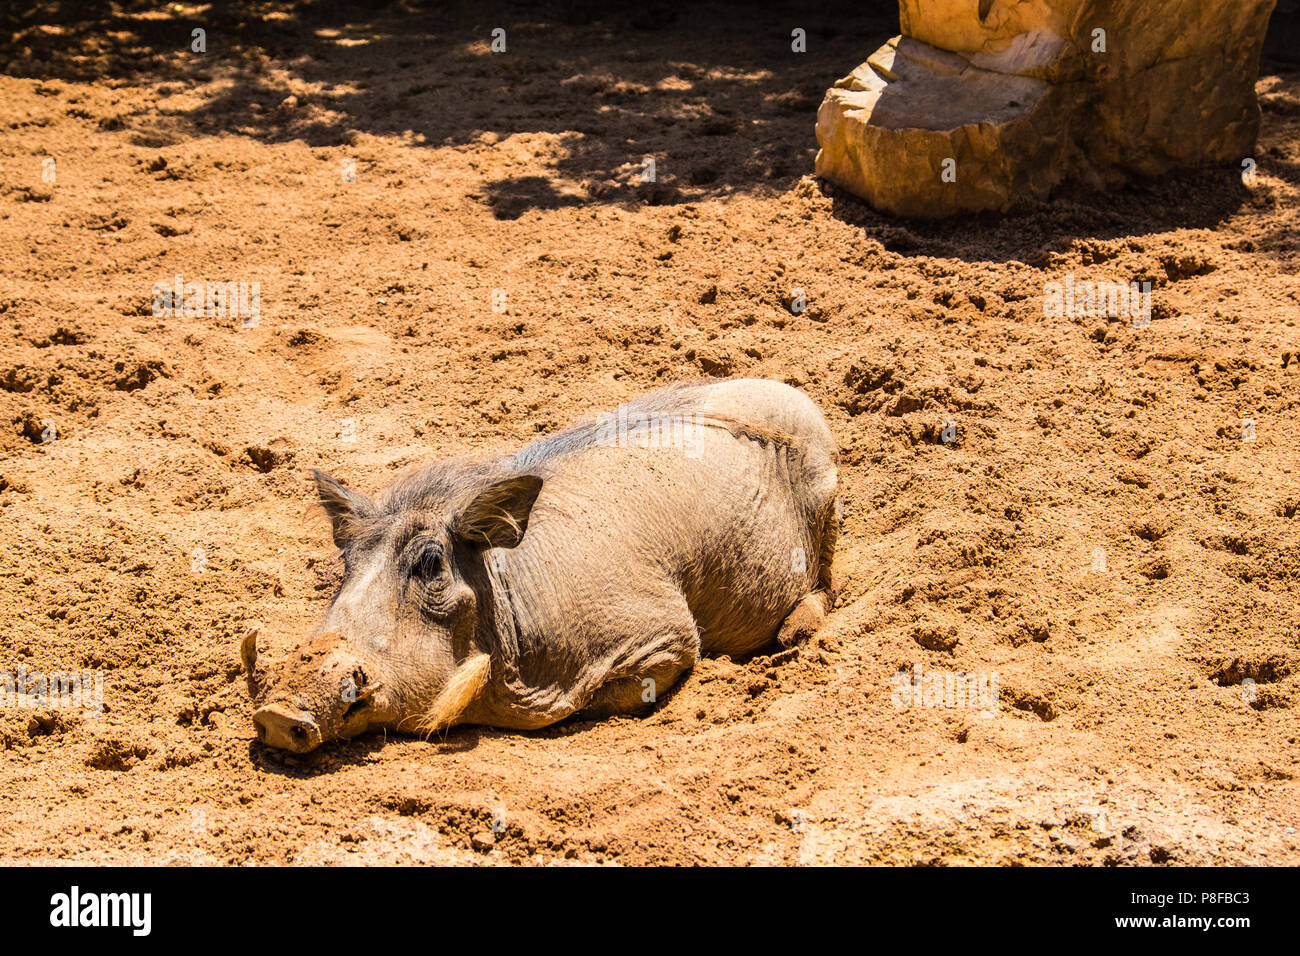 African swine with tusks chilling out Stock Photo